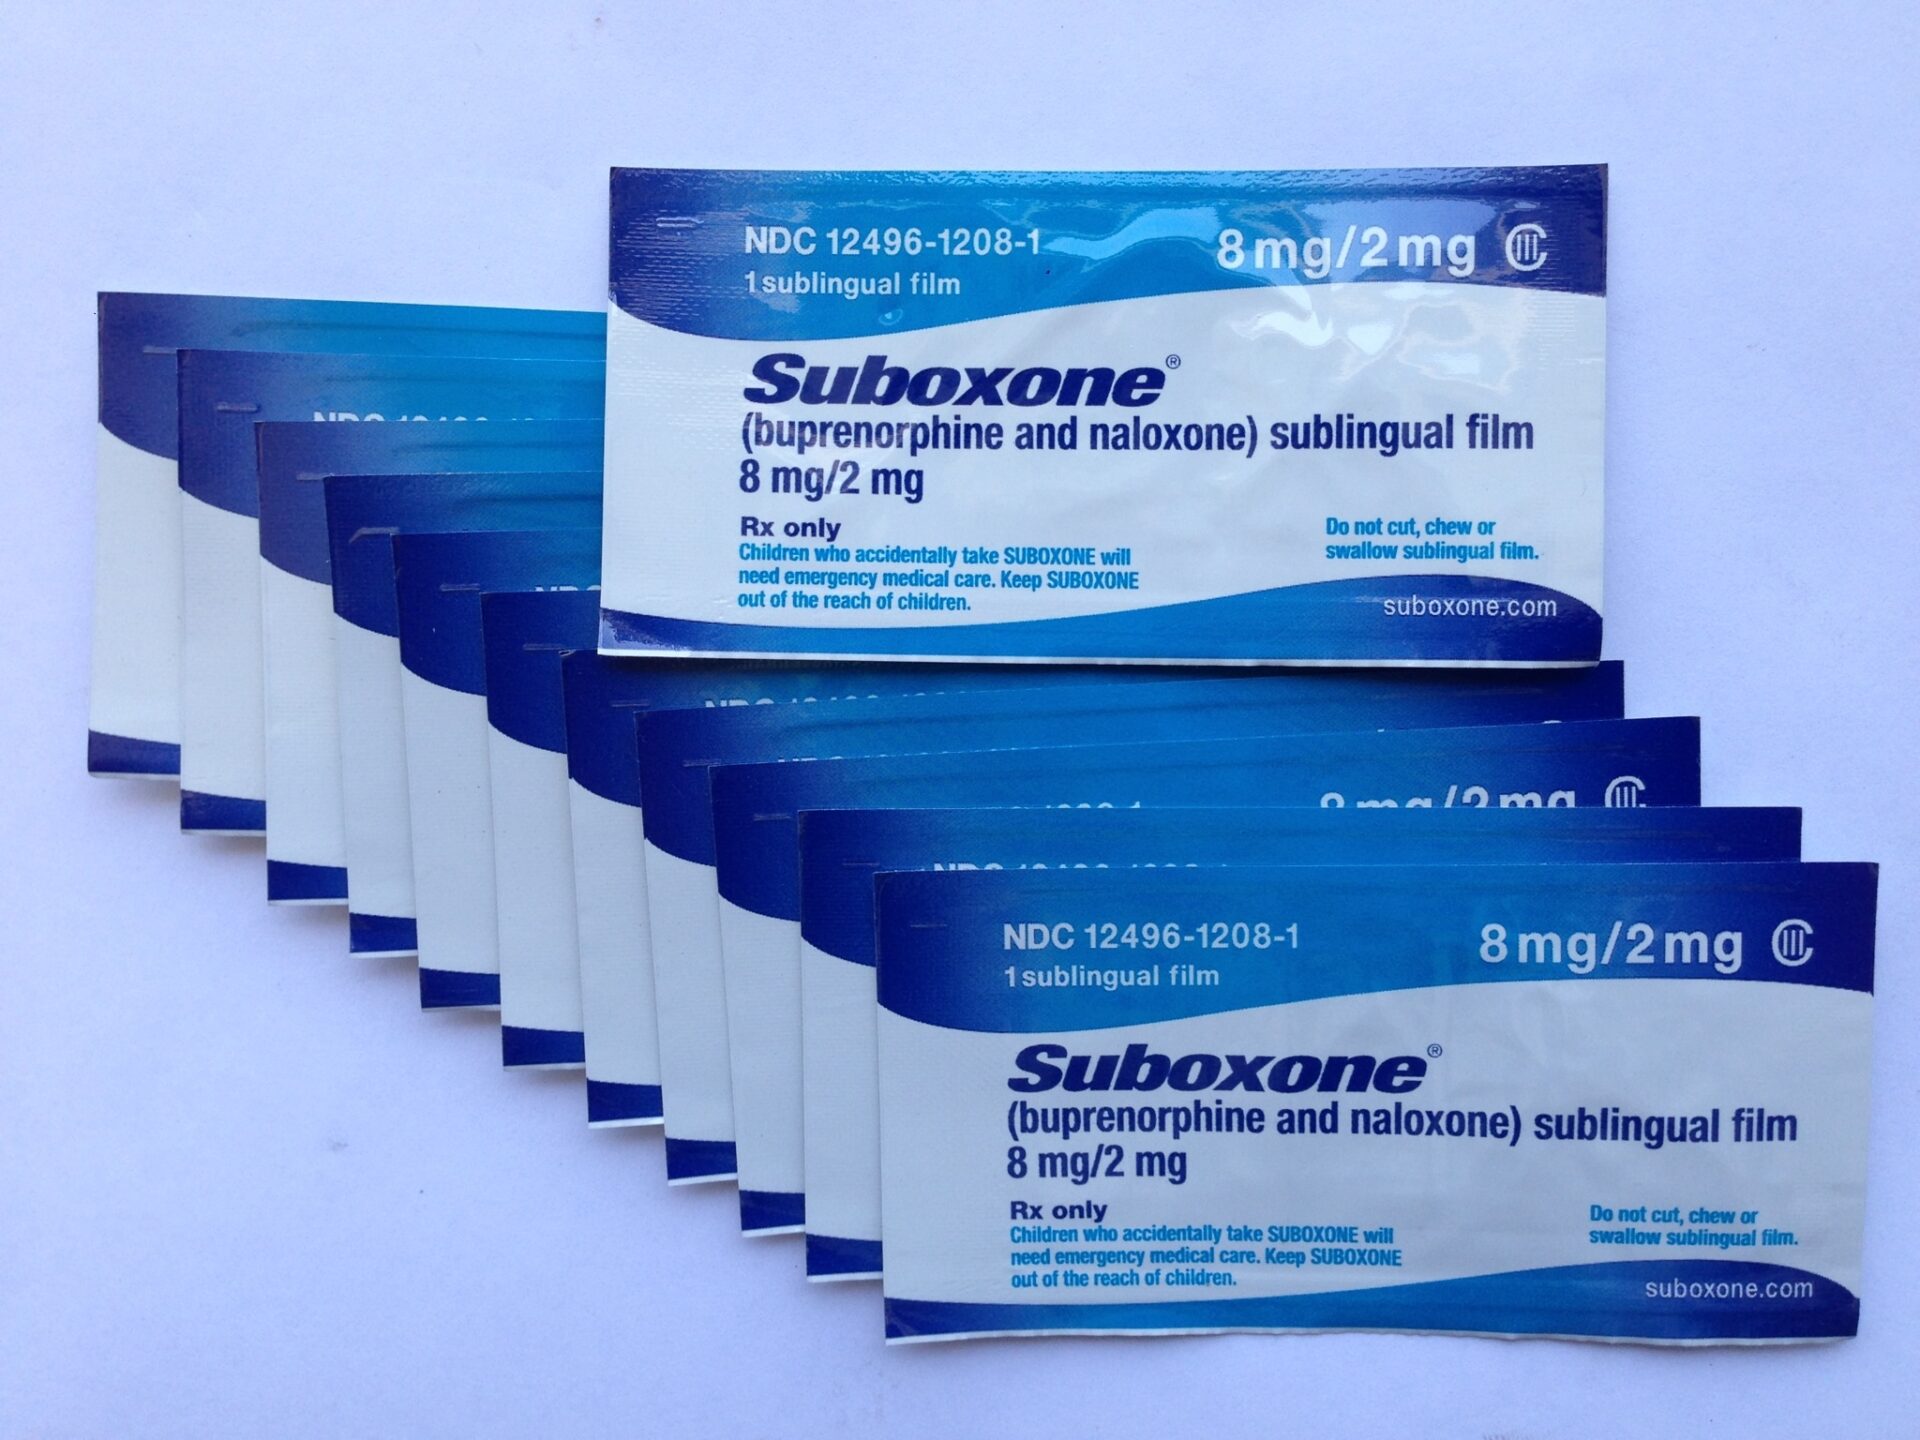 Benefits of Suboxone Treatment for Opioid Addiction